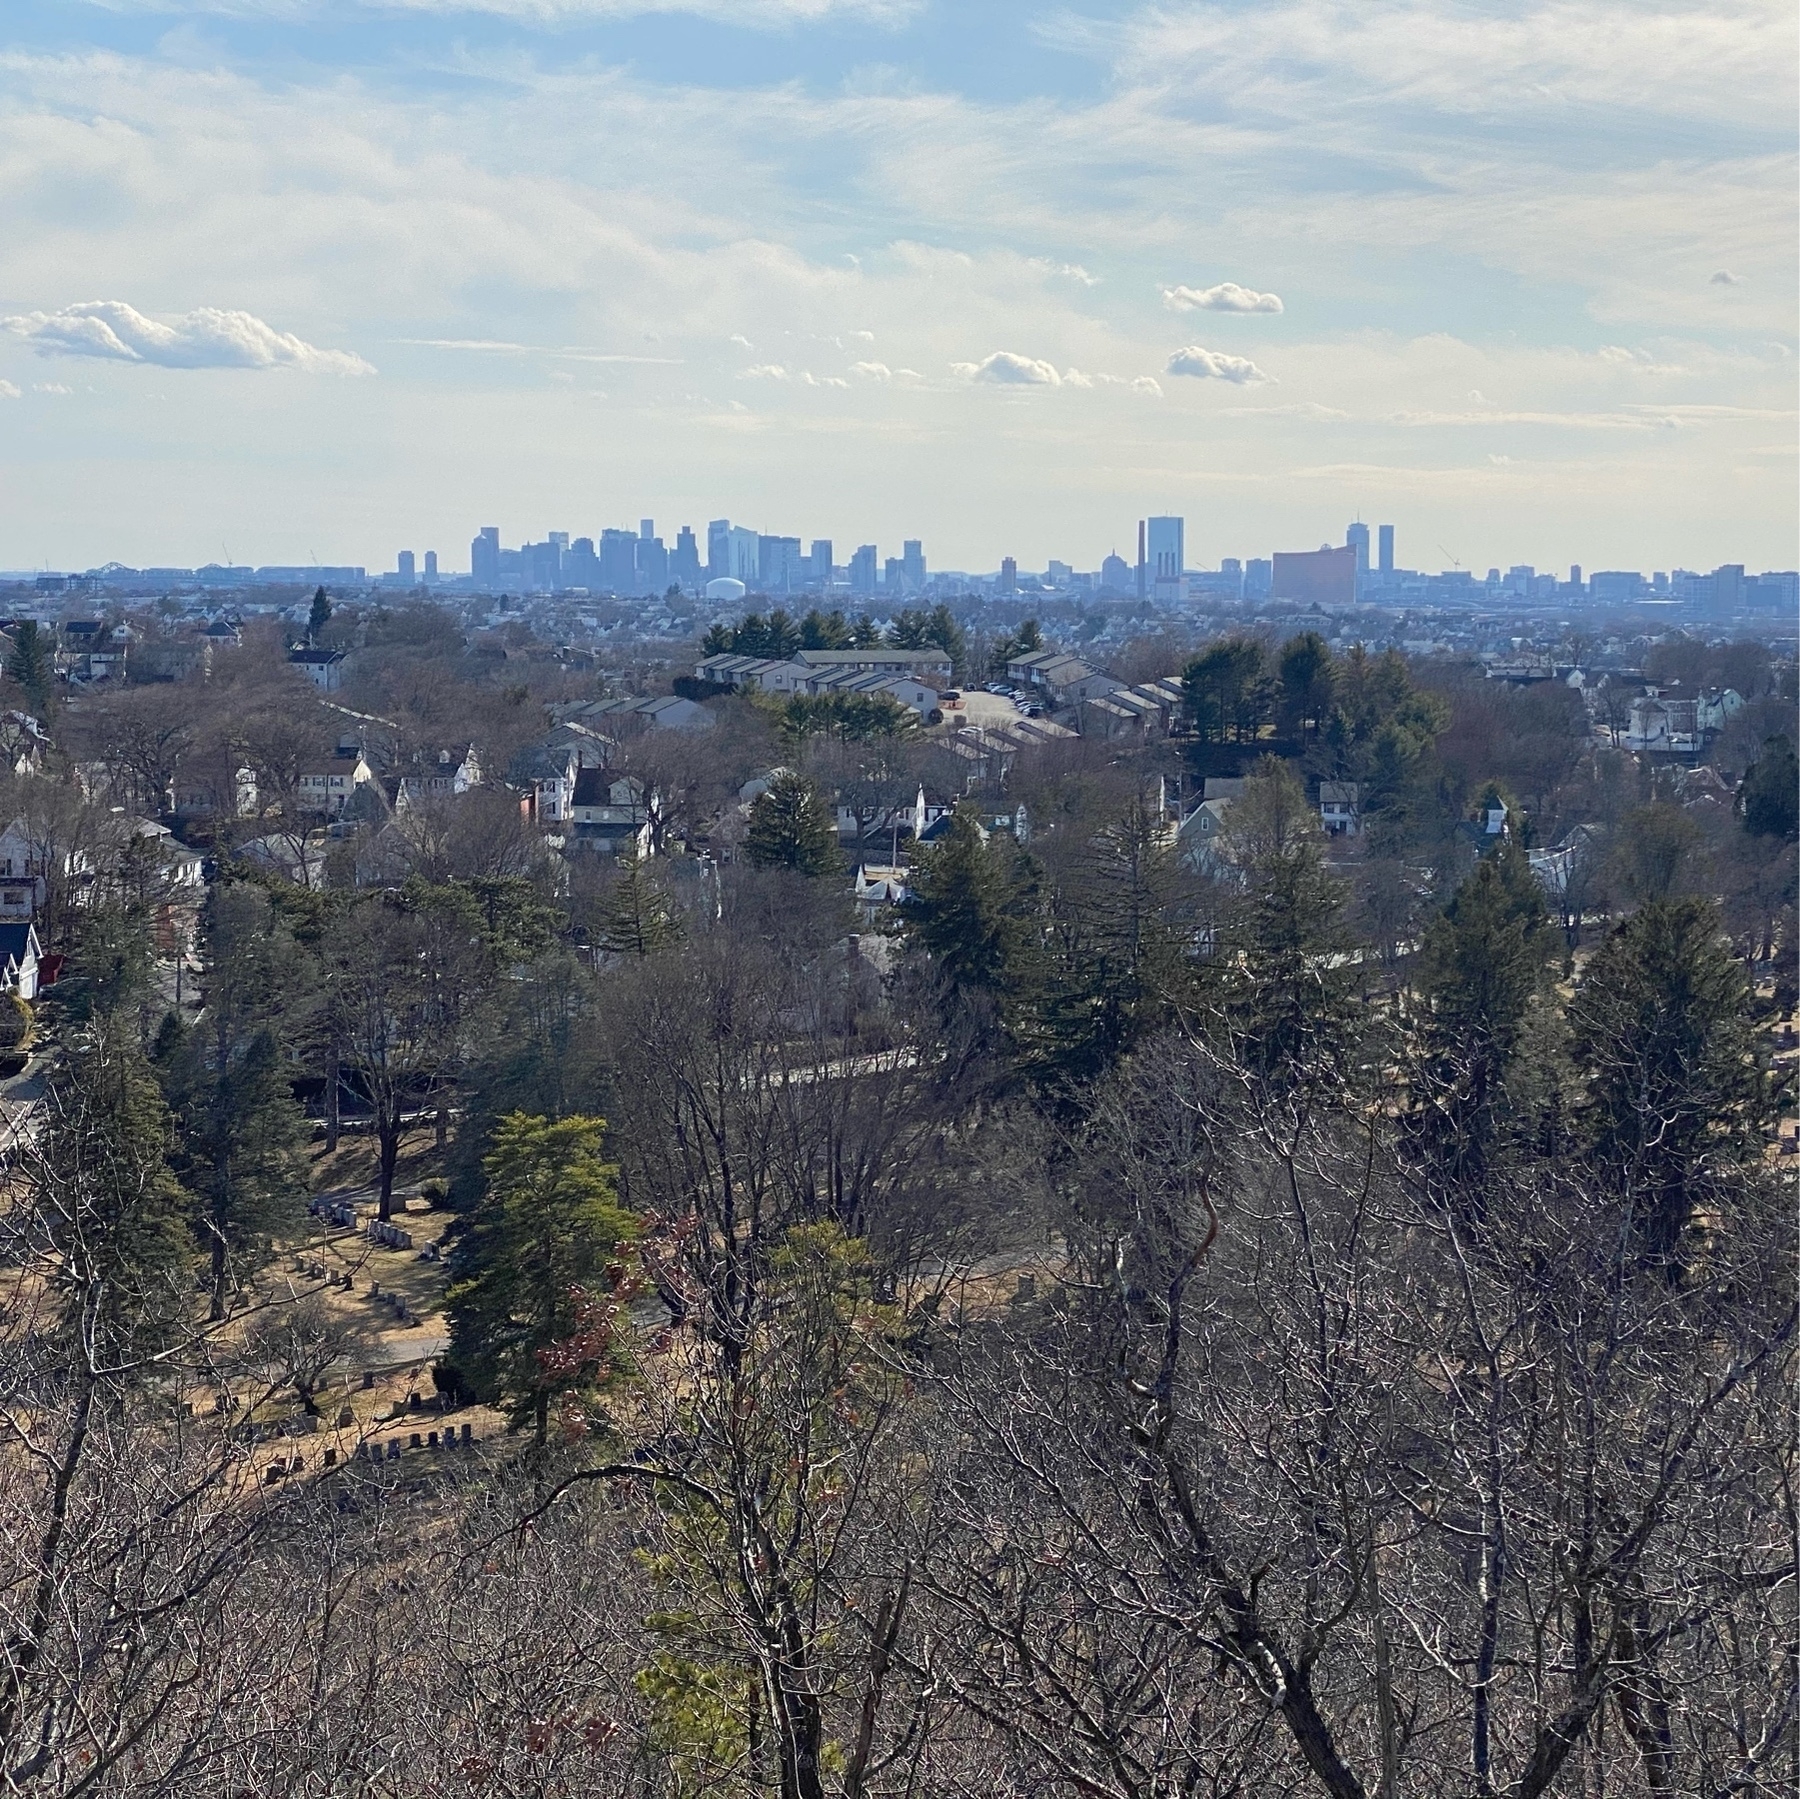 View from a hill over a tree covered suburb with the Boston skyline in the distance.